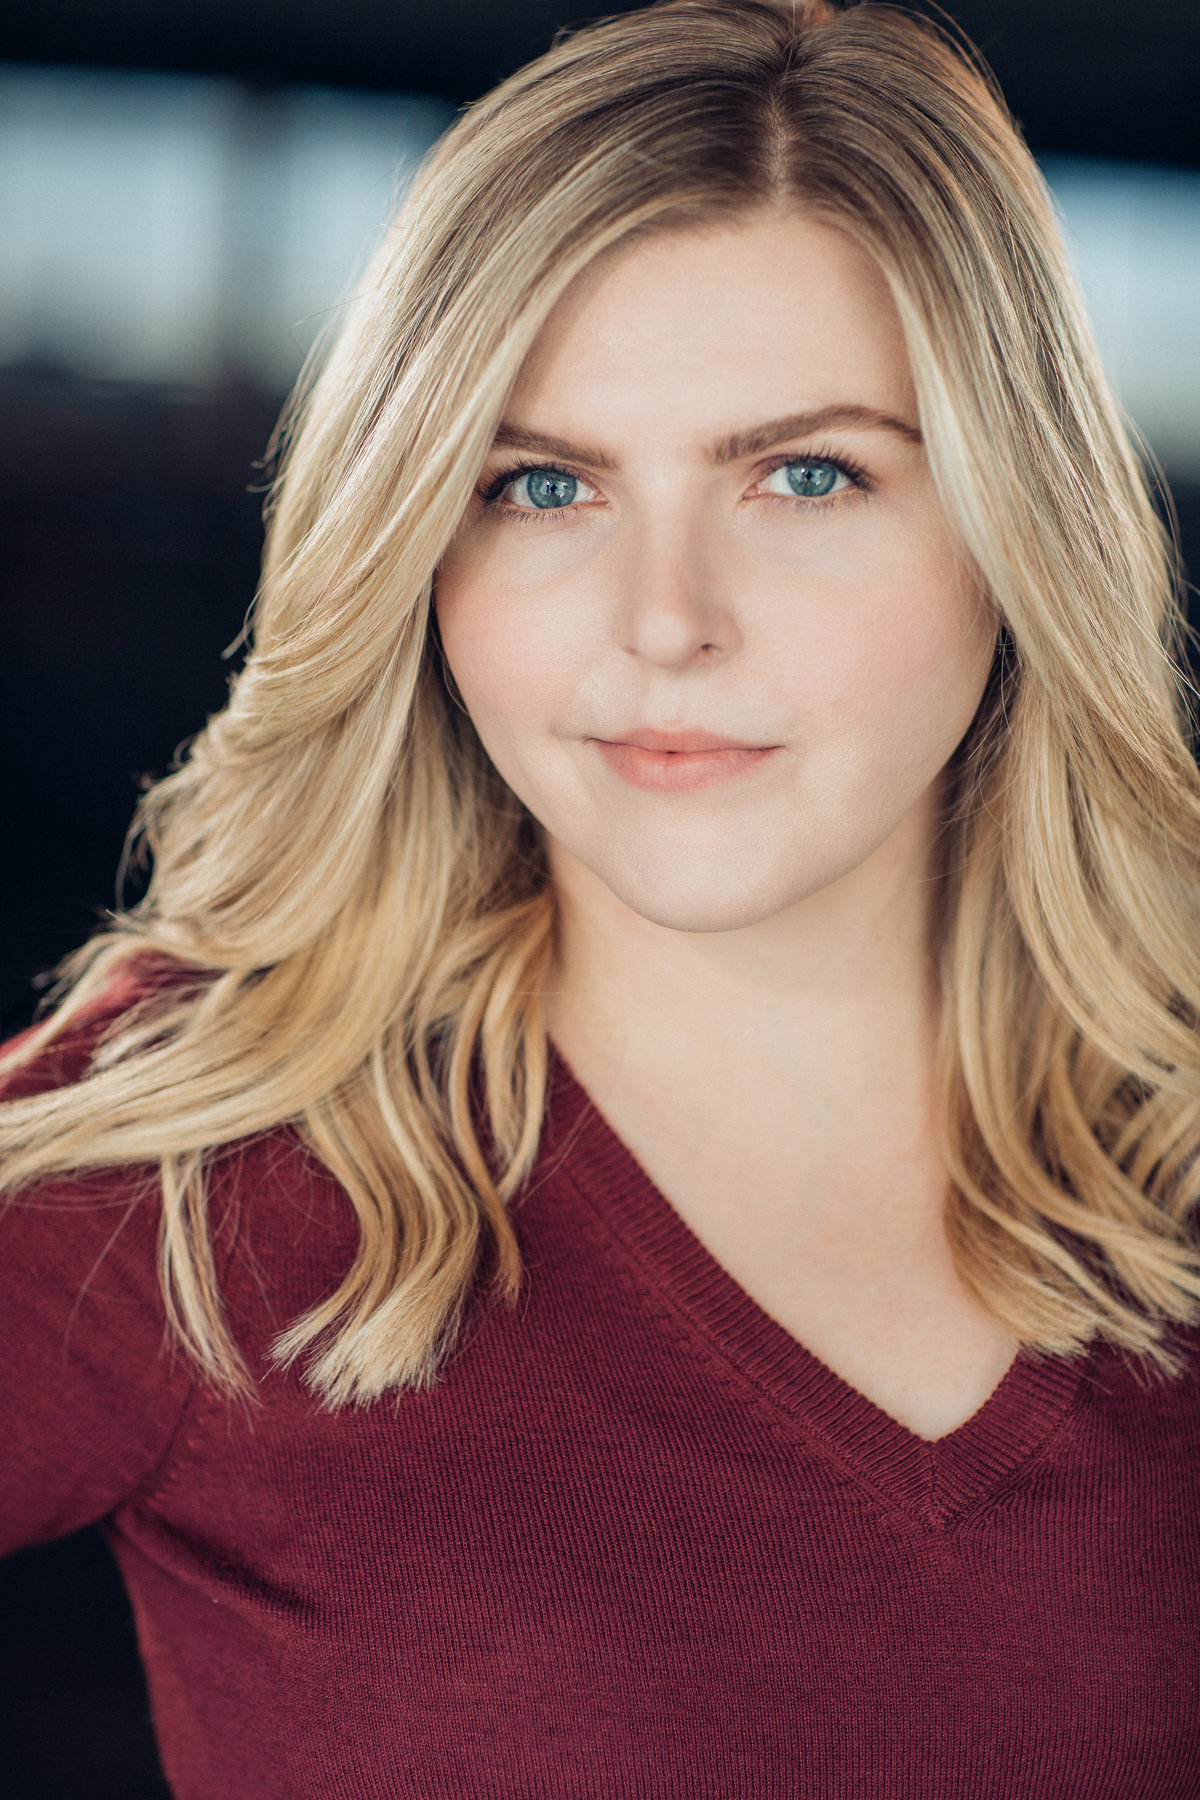 Headshot Photograph Of Young Woman In Maroon V-Neck Shirt Los Angeles